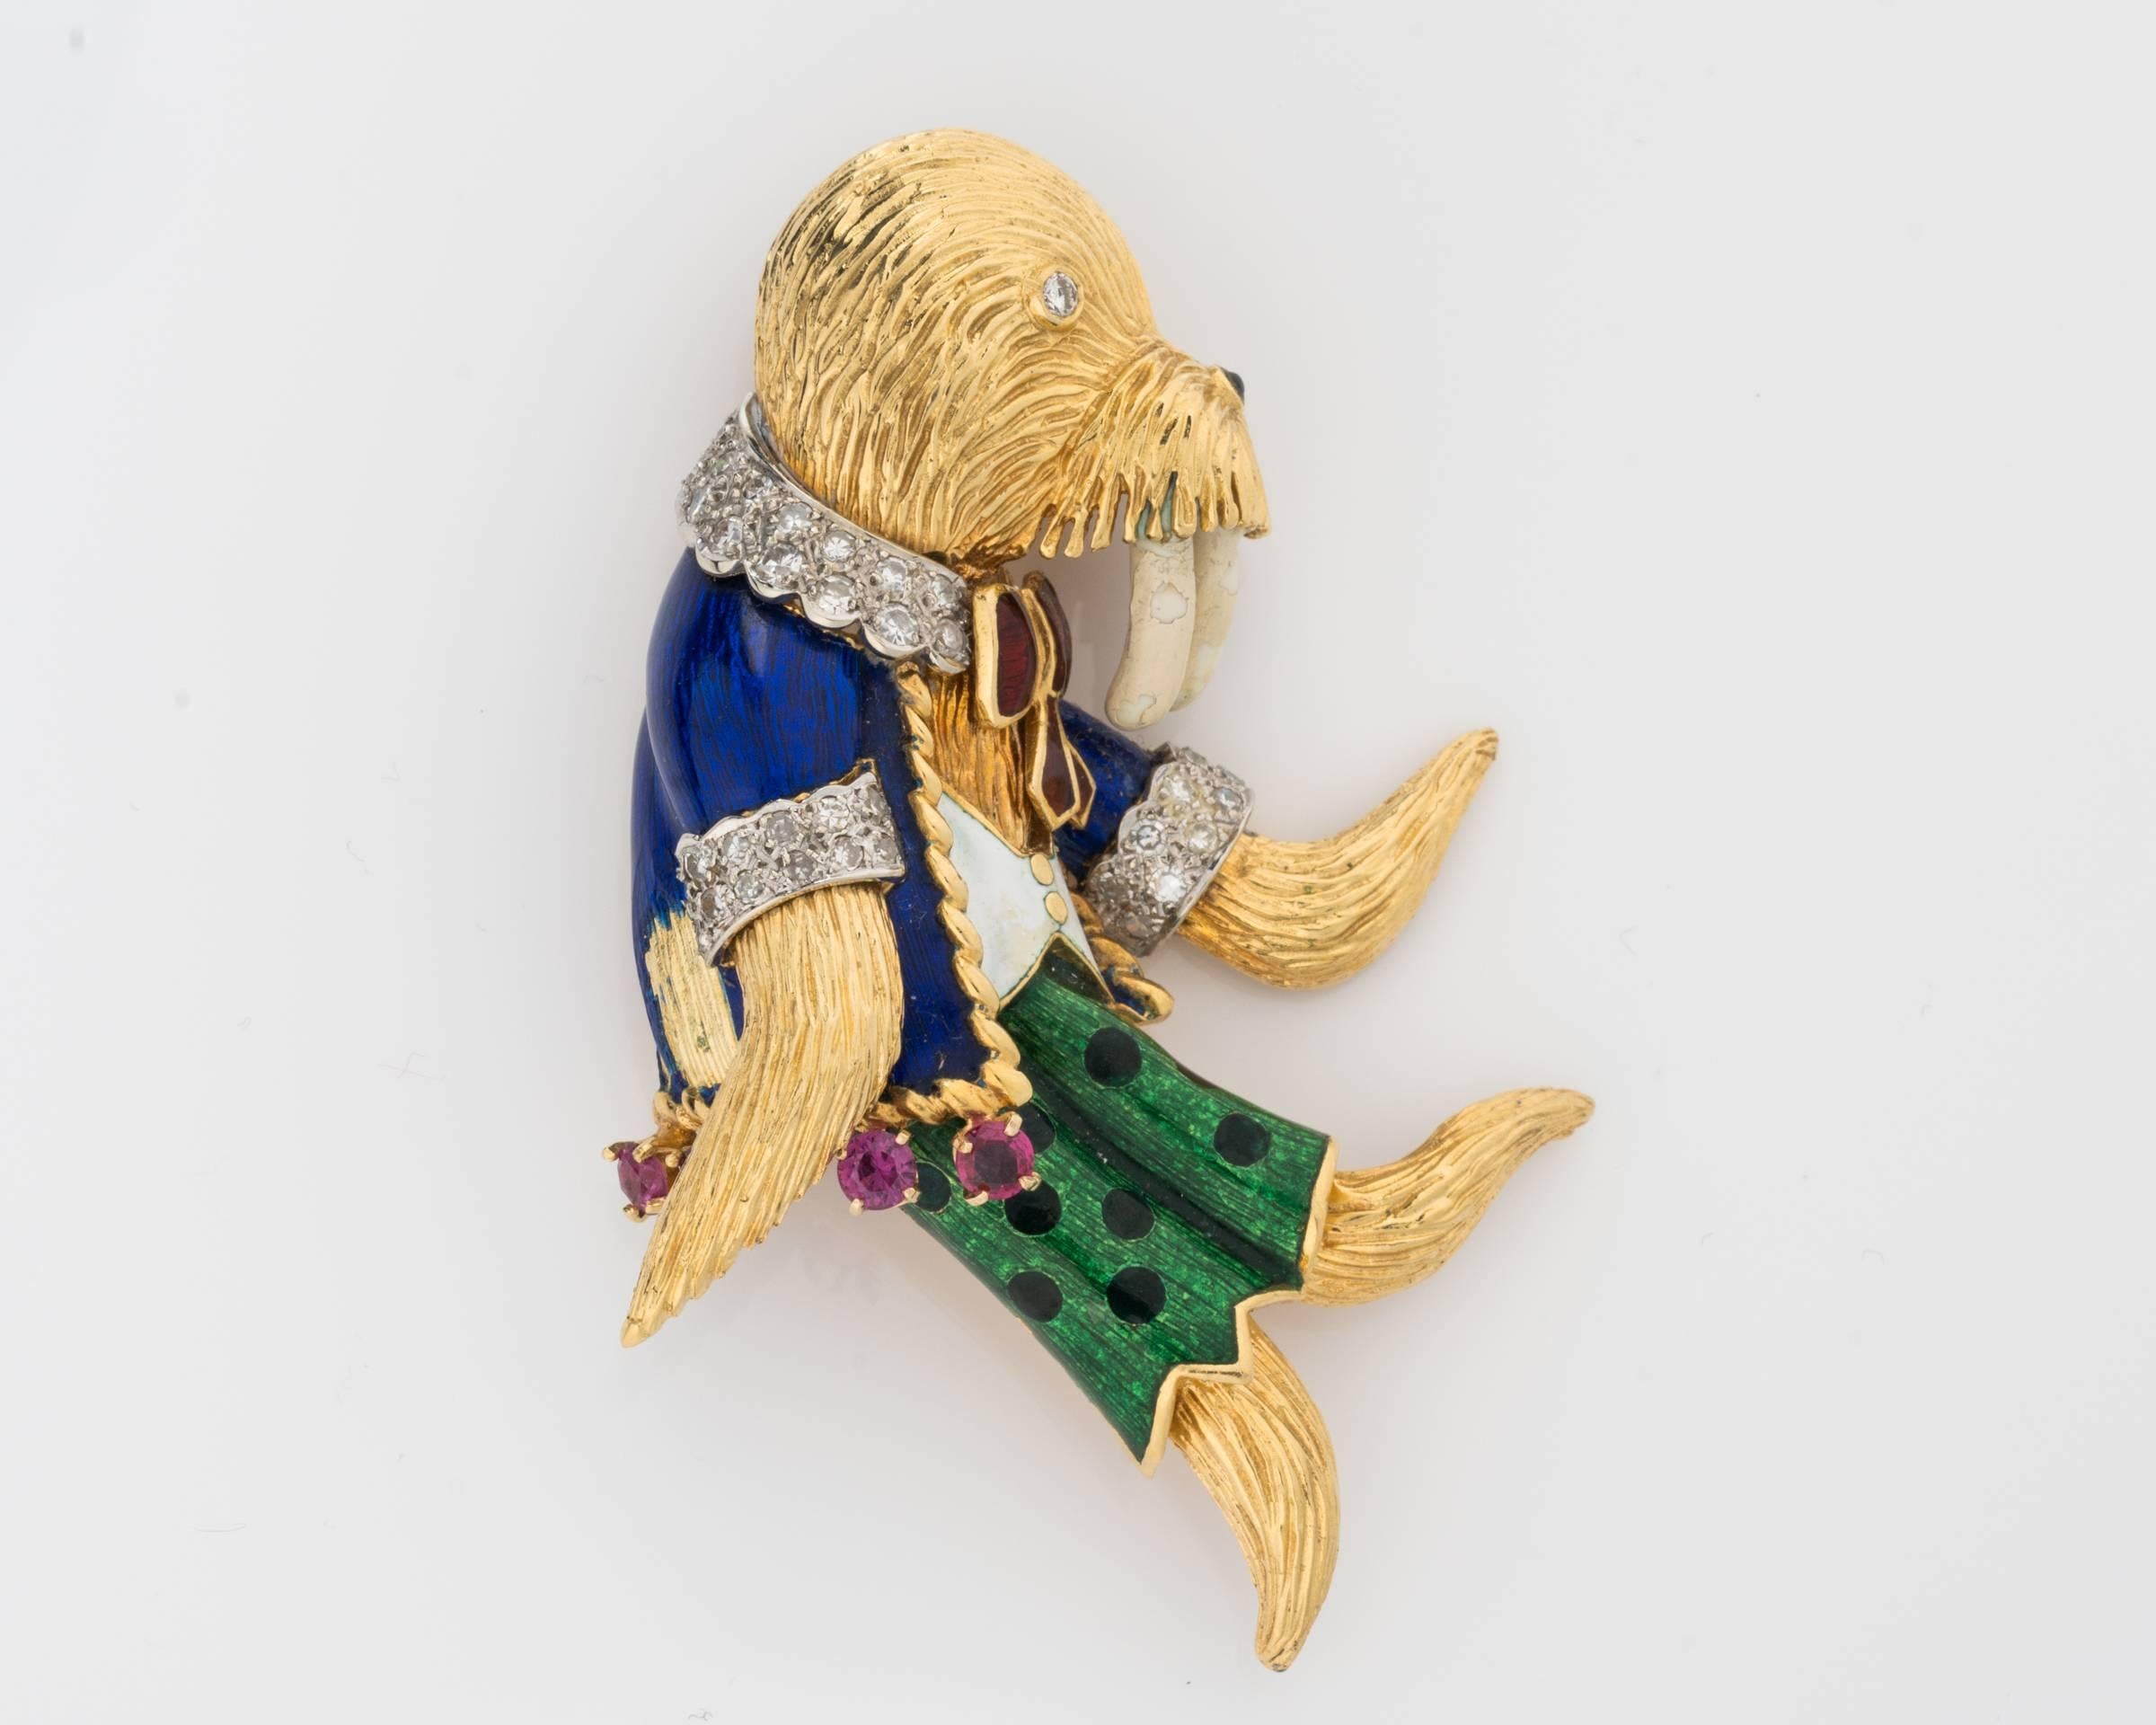 A flashback from a childhood fairy tale, this pin is extraordinary with intricate enamel, gold and diamond work done by hand. Retro vintage, belonging to circa 1950s, the enamel on this is in great condition with minor chipping on the walrus teeth.